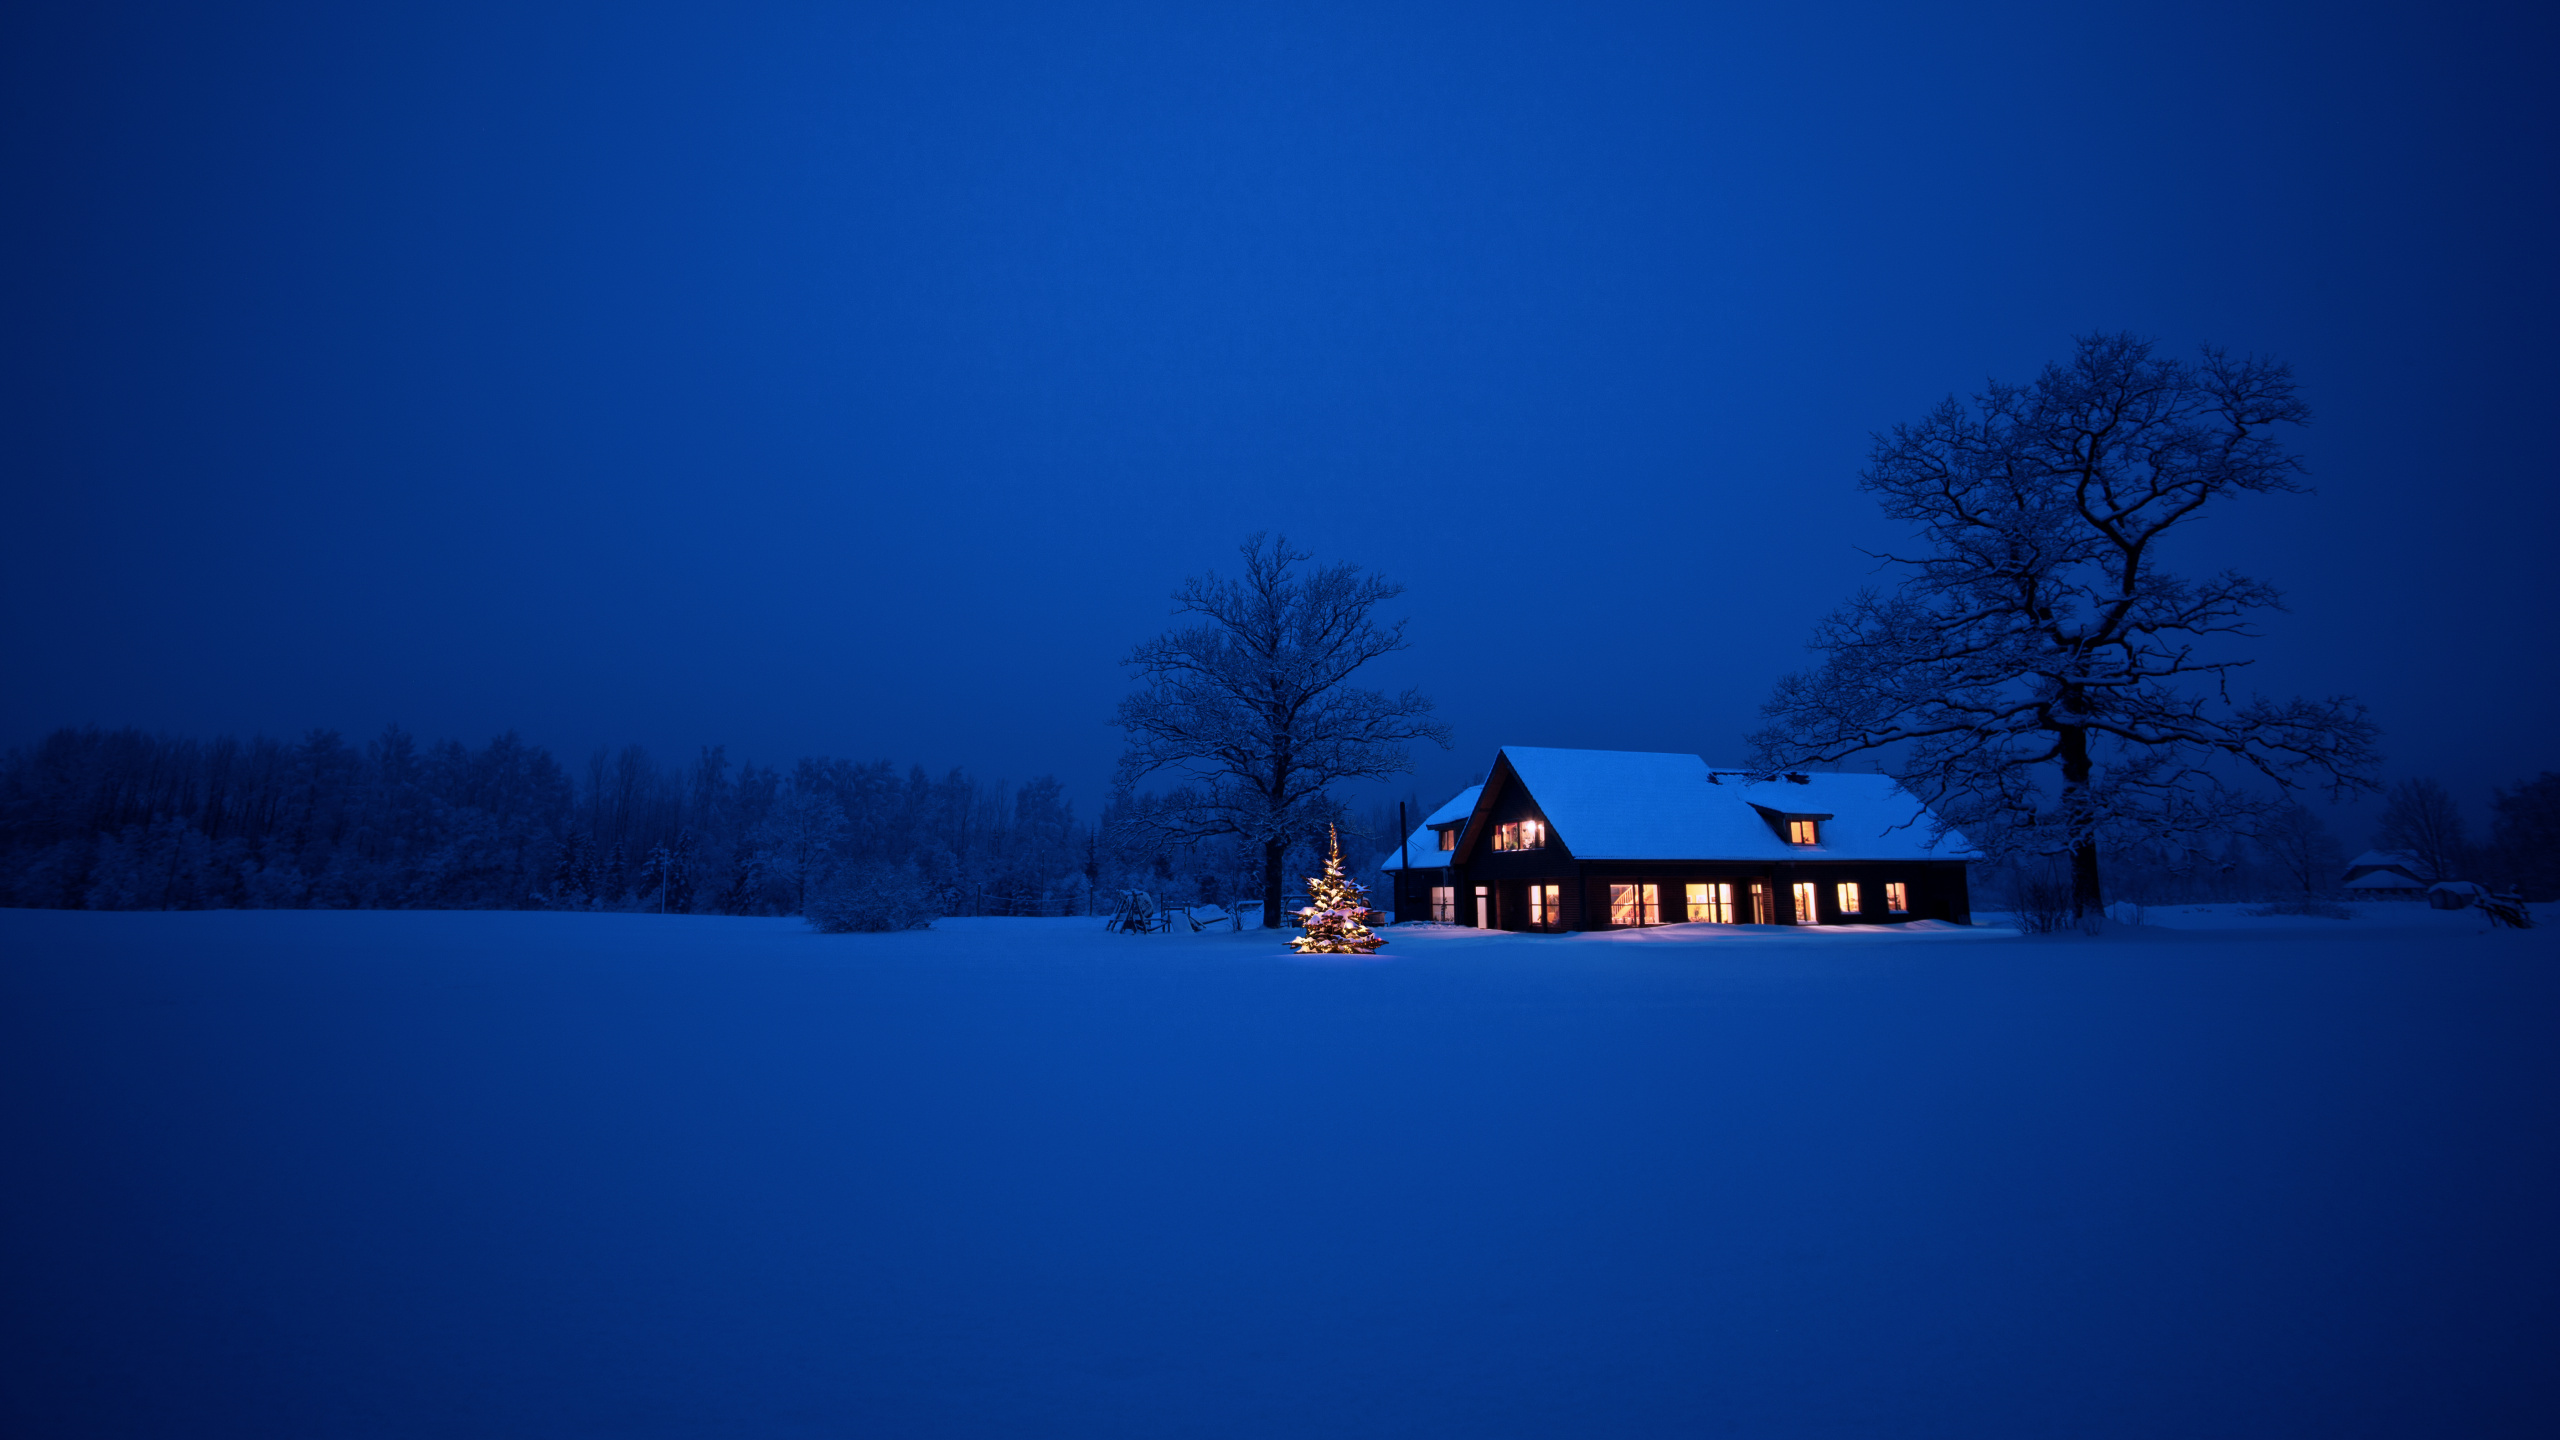 Brown Wooden House on Snow Covered Ground During Night Time. Wallpaper in 2560x1440 Resolution